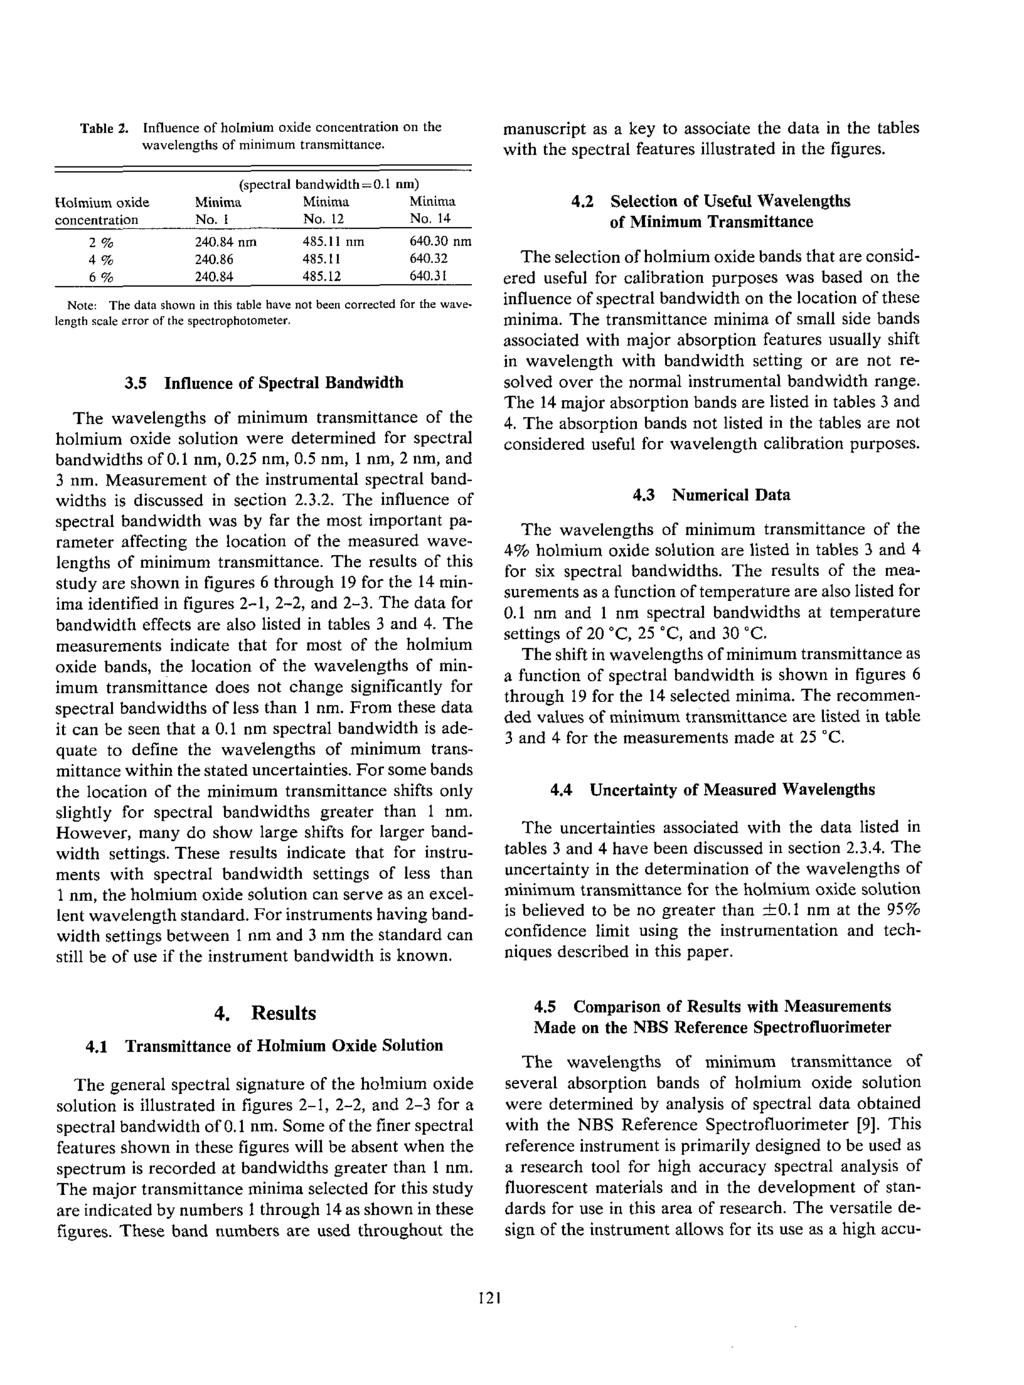 Table 2. Influence of holmium oxide concentration on the wavelengths of minimum transmittance.